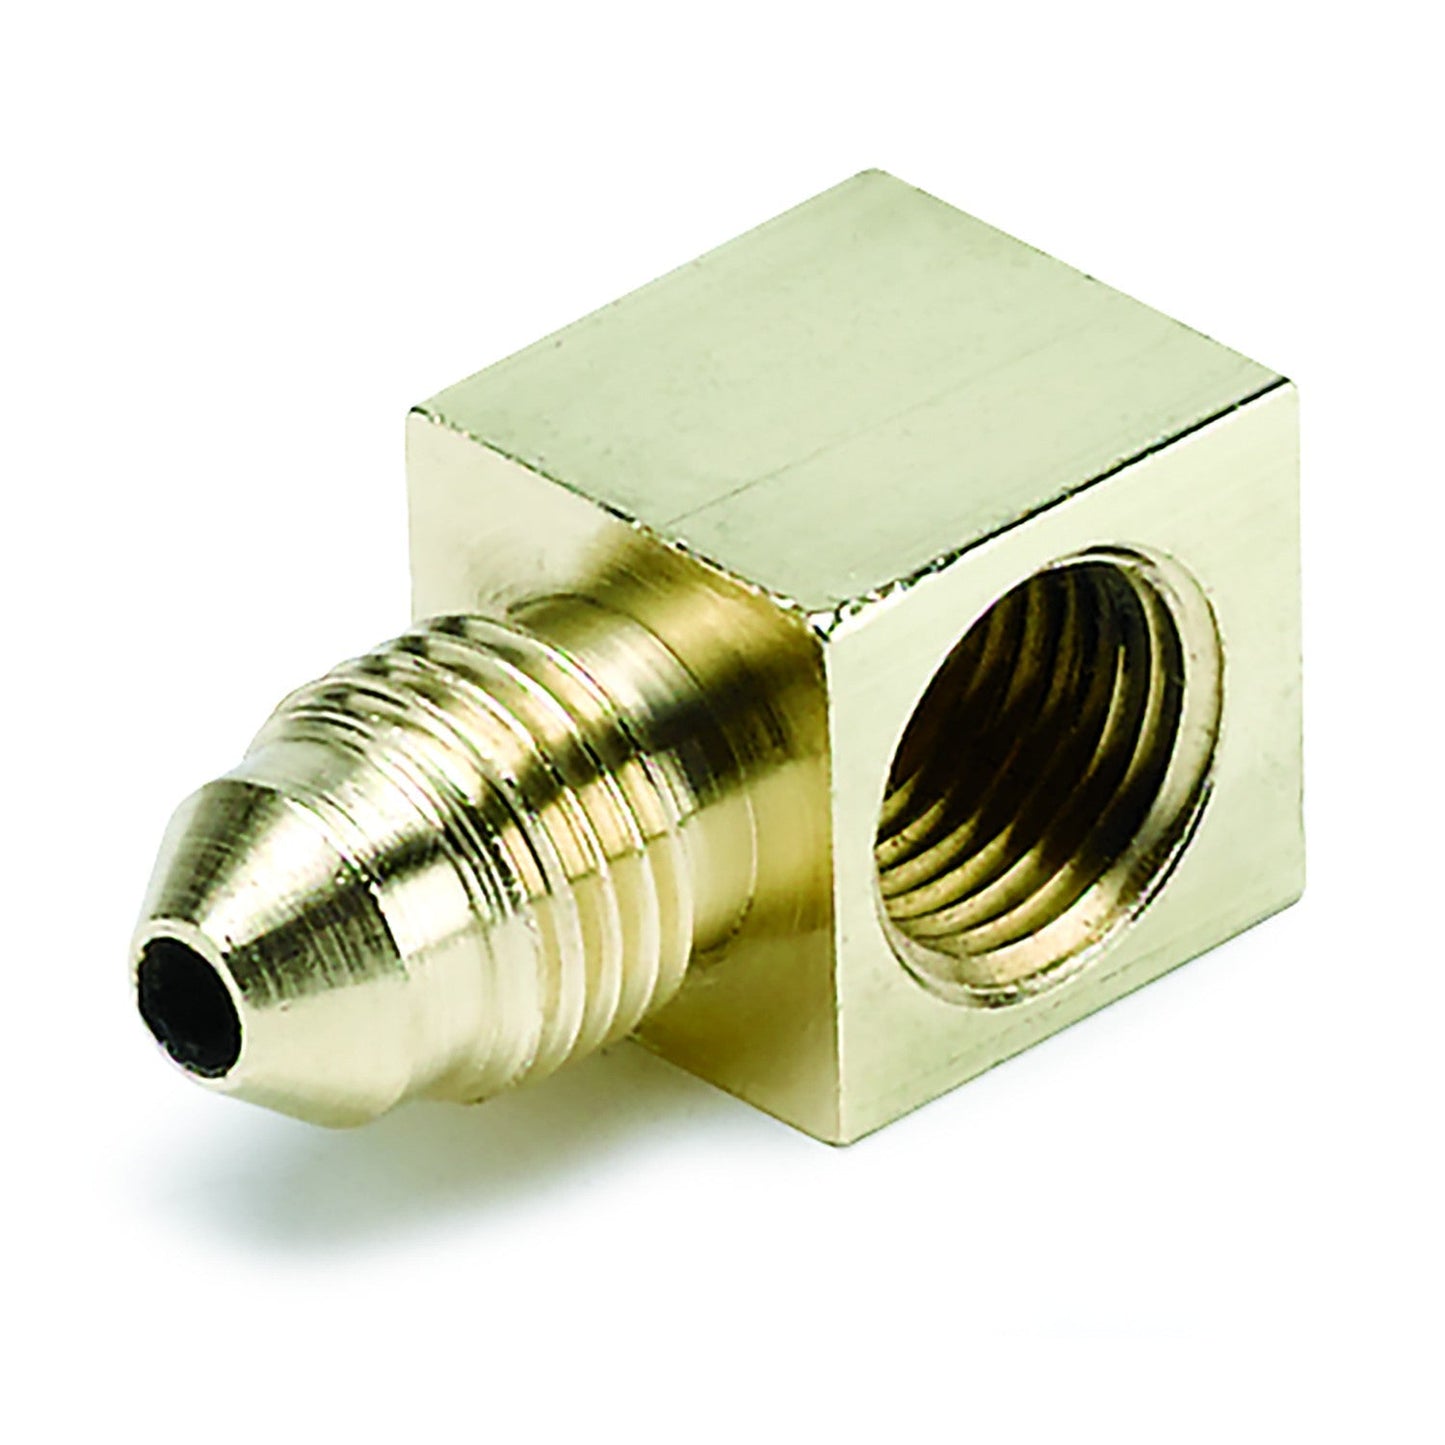 AutoMeter - FITTING, ADAPTER, 90 °, 1/8" NPTF FEMALE TO -3AN MALE, BRASS (3270)